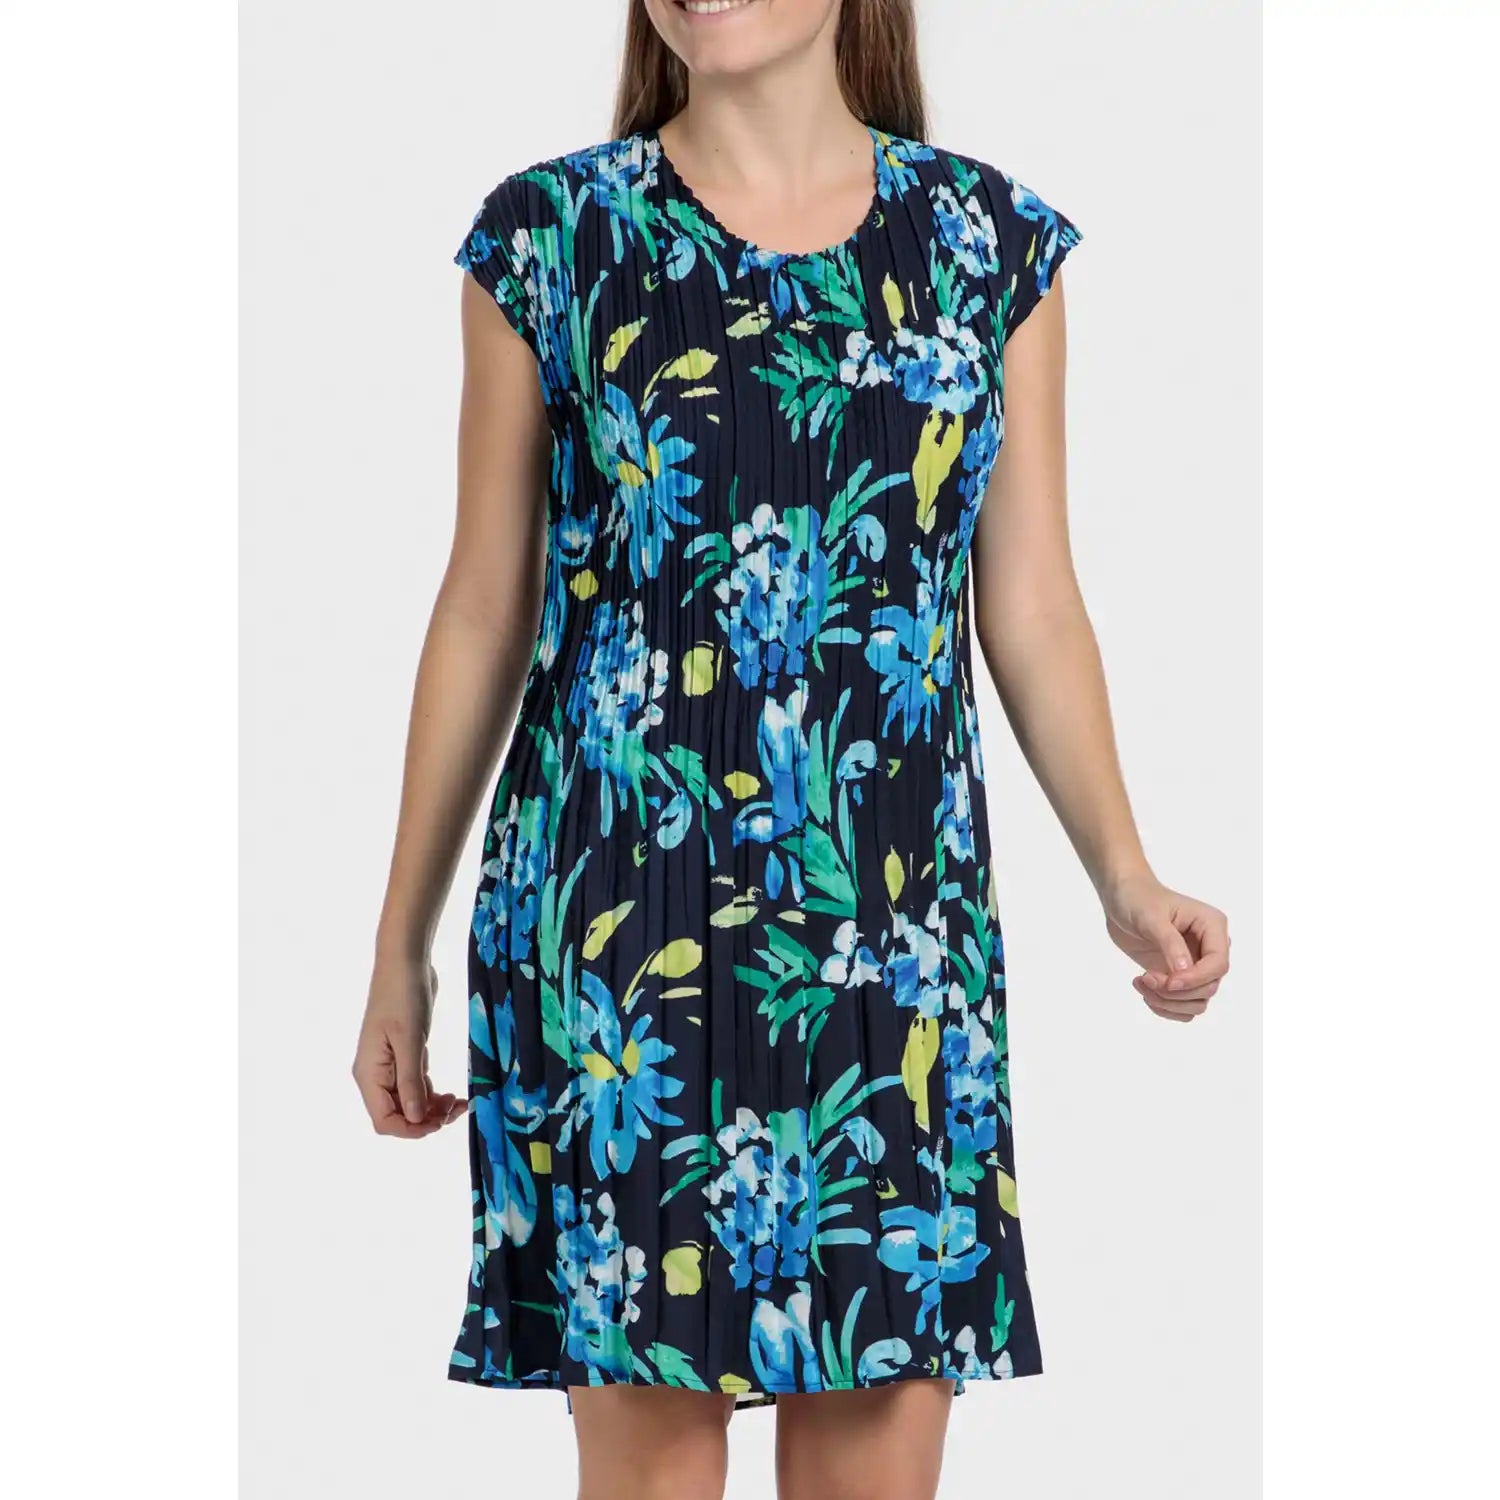 Punt Roma Pleated Printed Dress - Blue / Navy 1 Shaws Department Stores